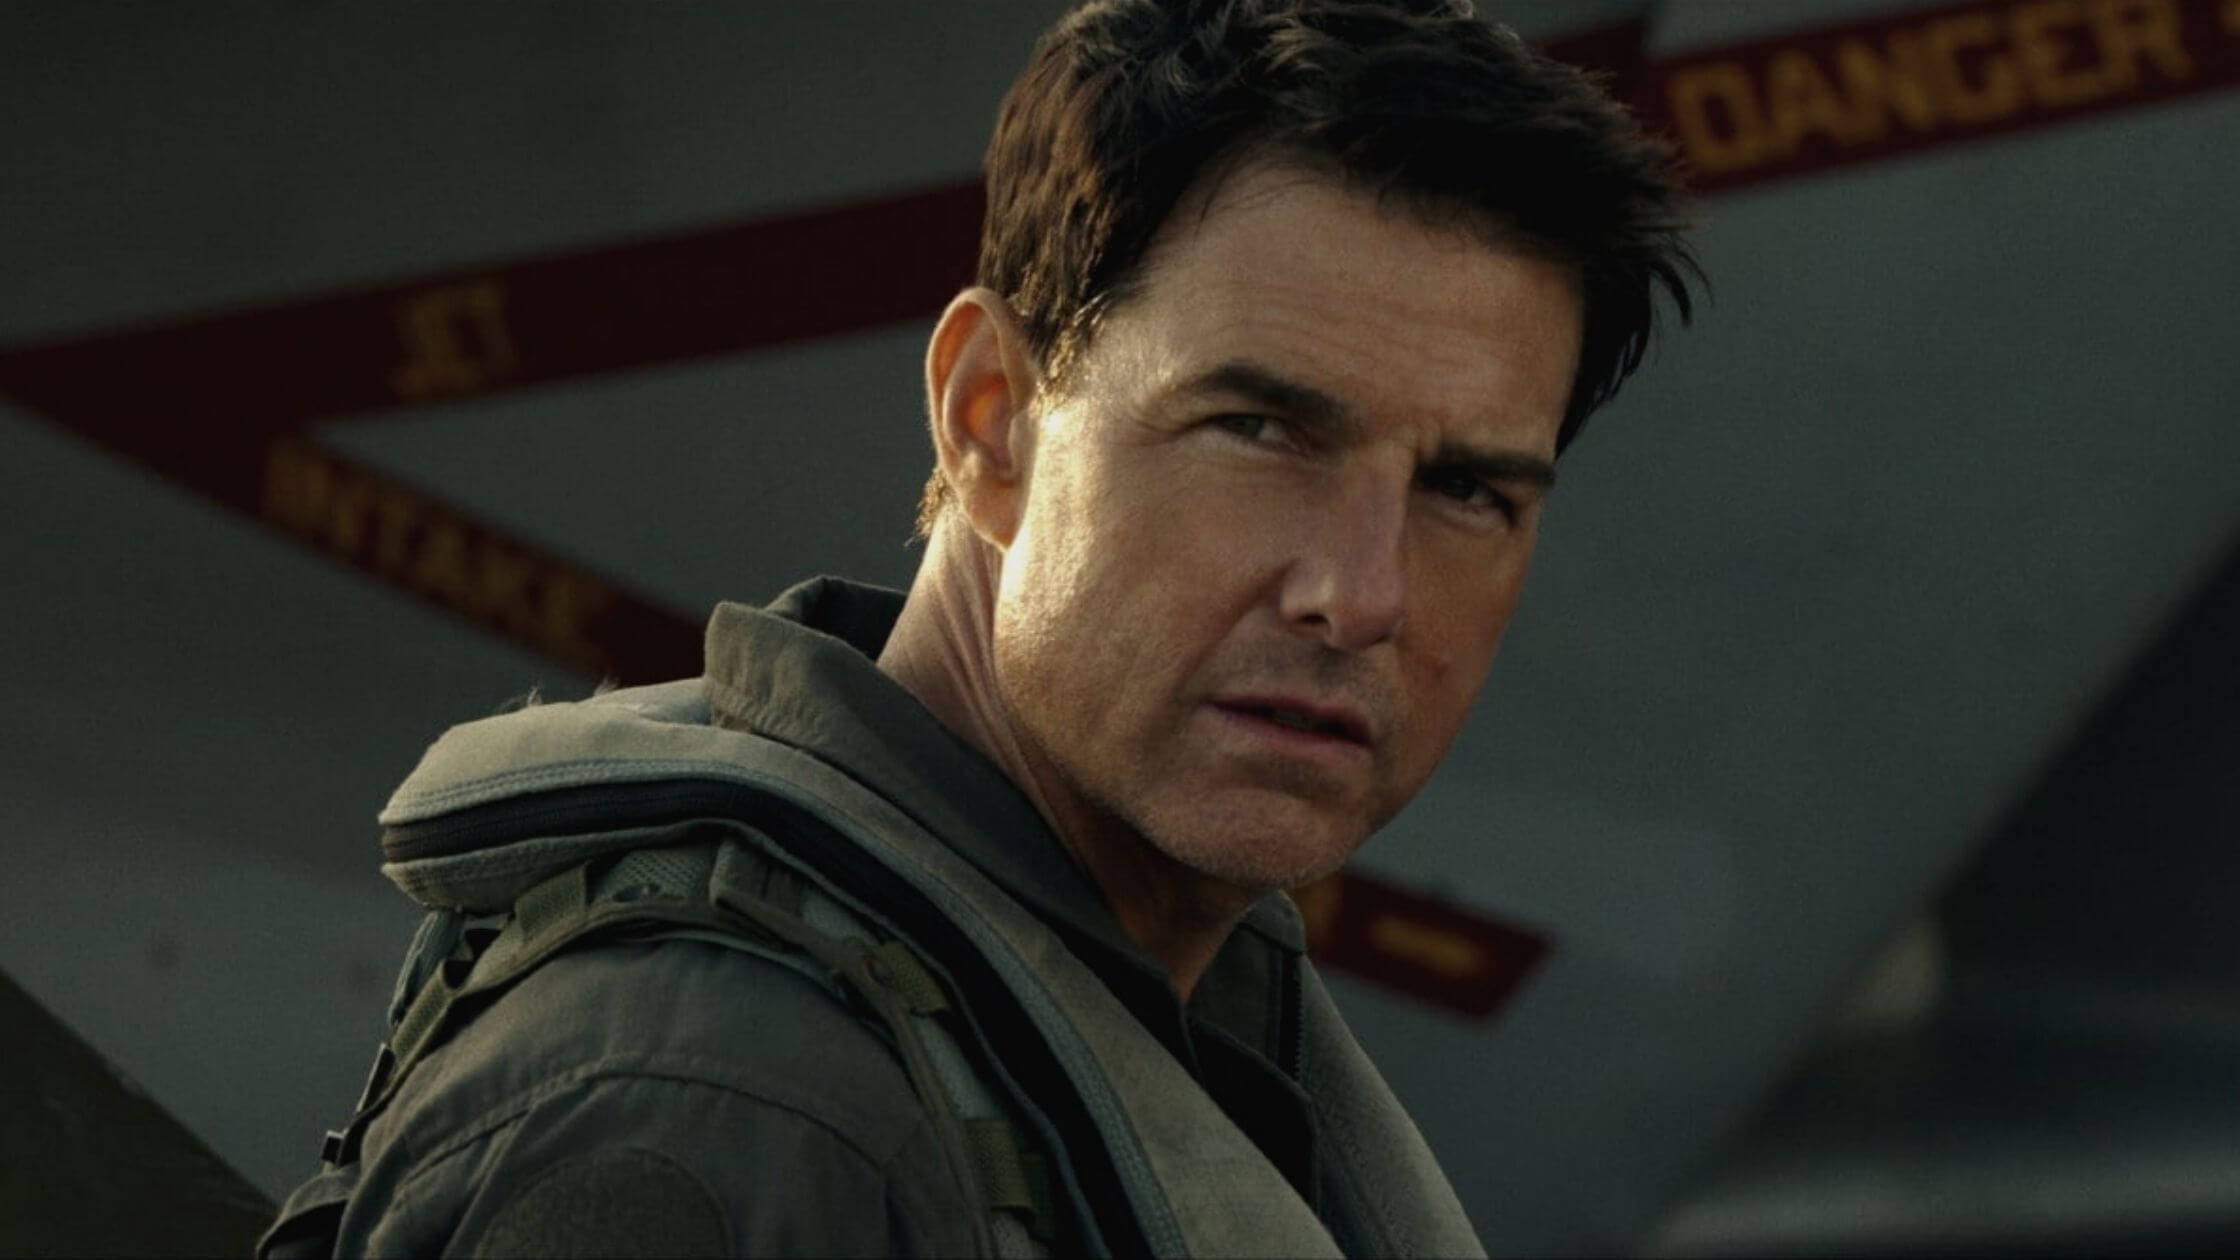 Tom Cruise’s Film Becomes The Highest Memorial Day Earner